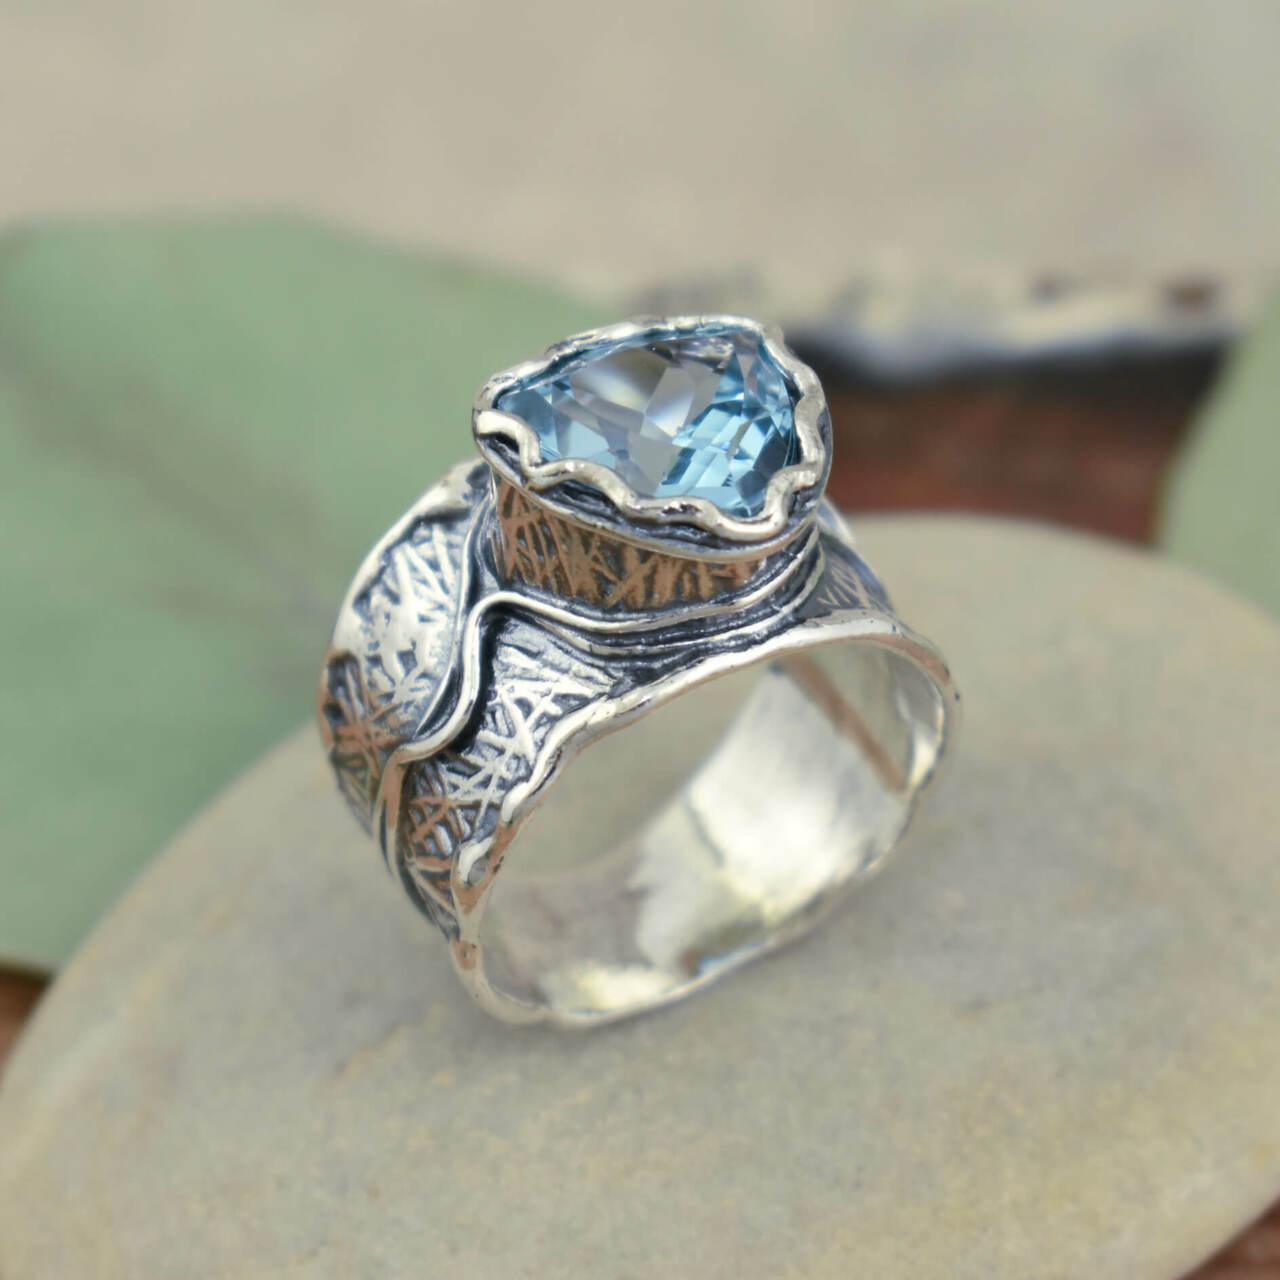 Wide band ring She's a Natural Ring - Blue Topaz 